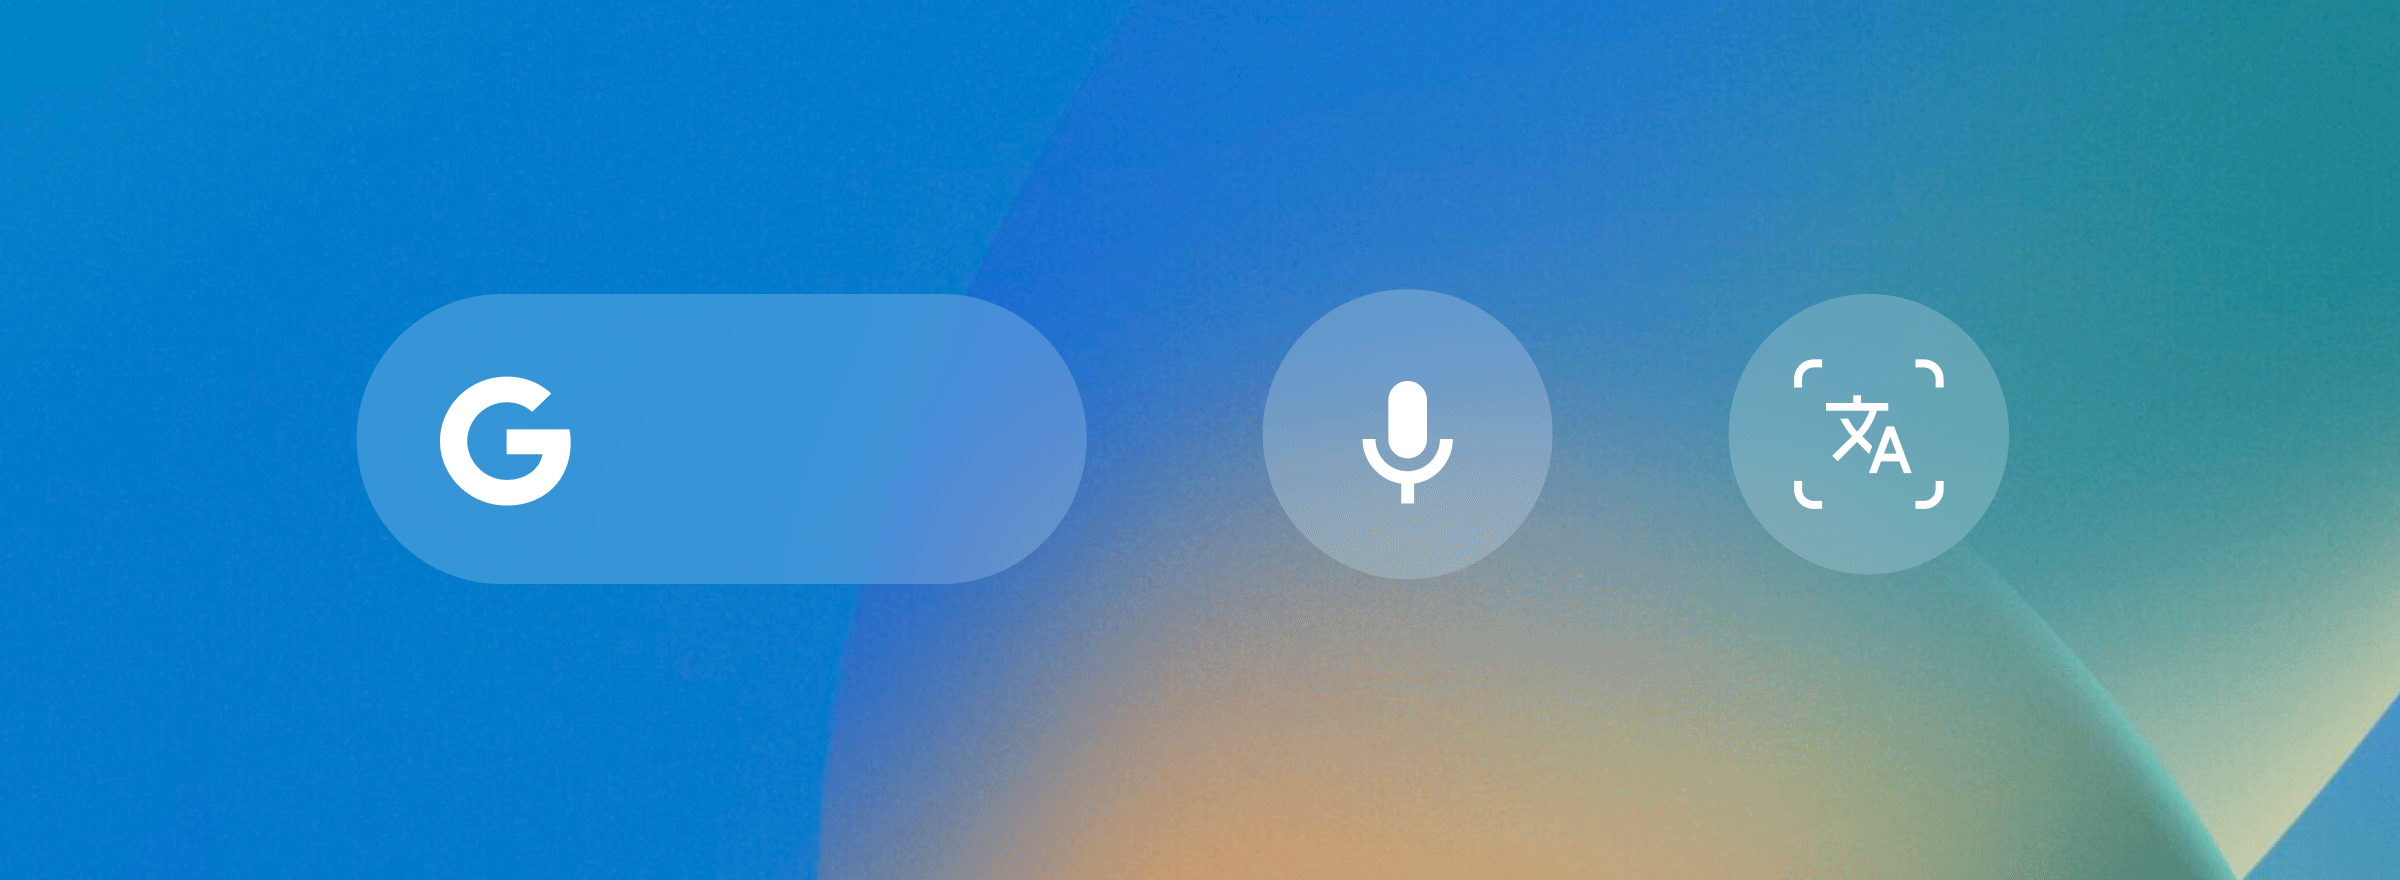 GIF of various Google Search Lock Screen widgets, including a rounded rectangular Search bar and four circular widgets for Voice, Lens, Translate via Lens, Shopping via Lens and Homework via Lens.